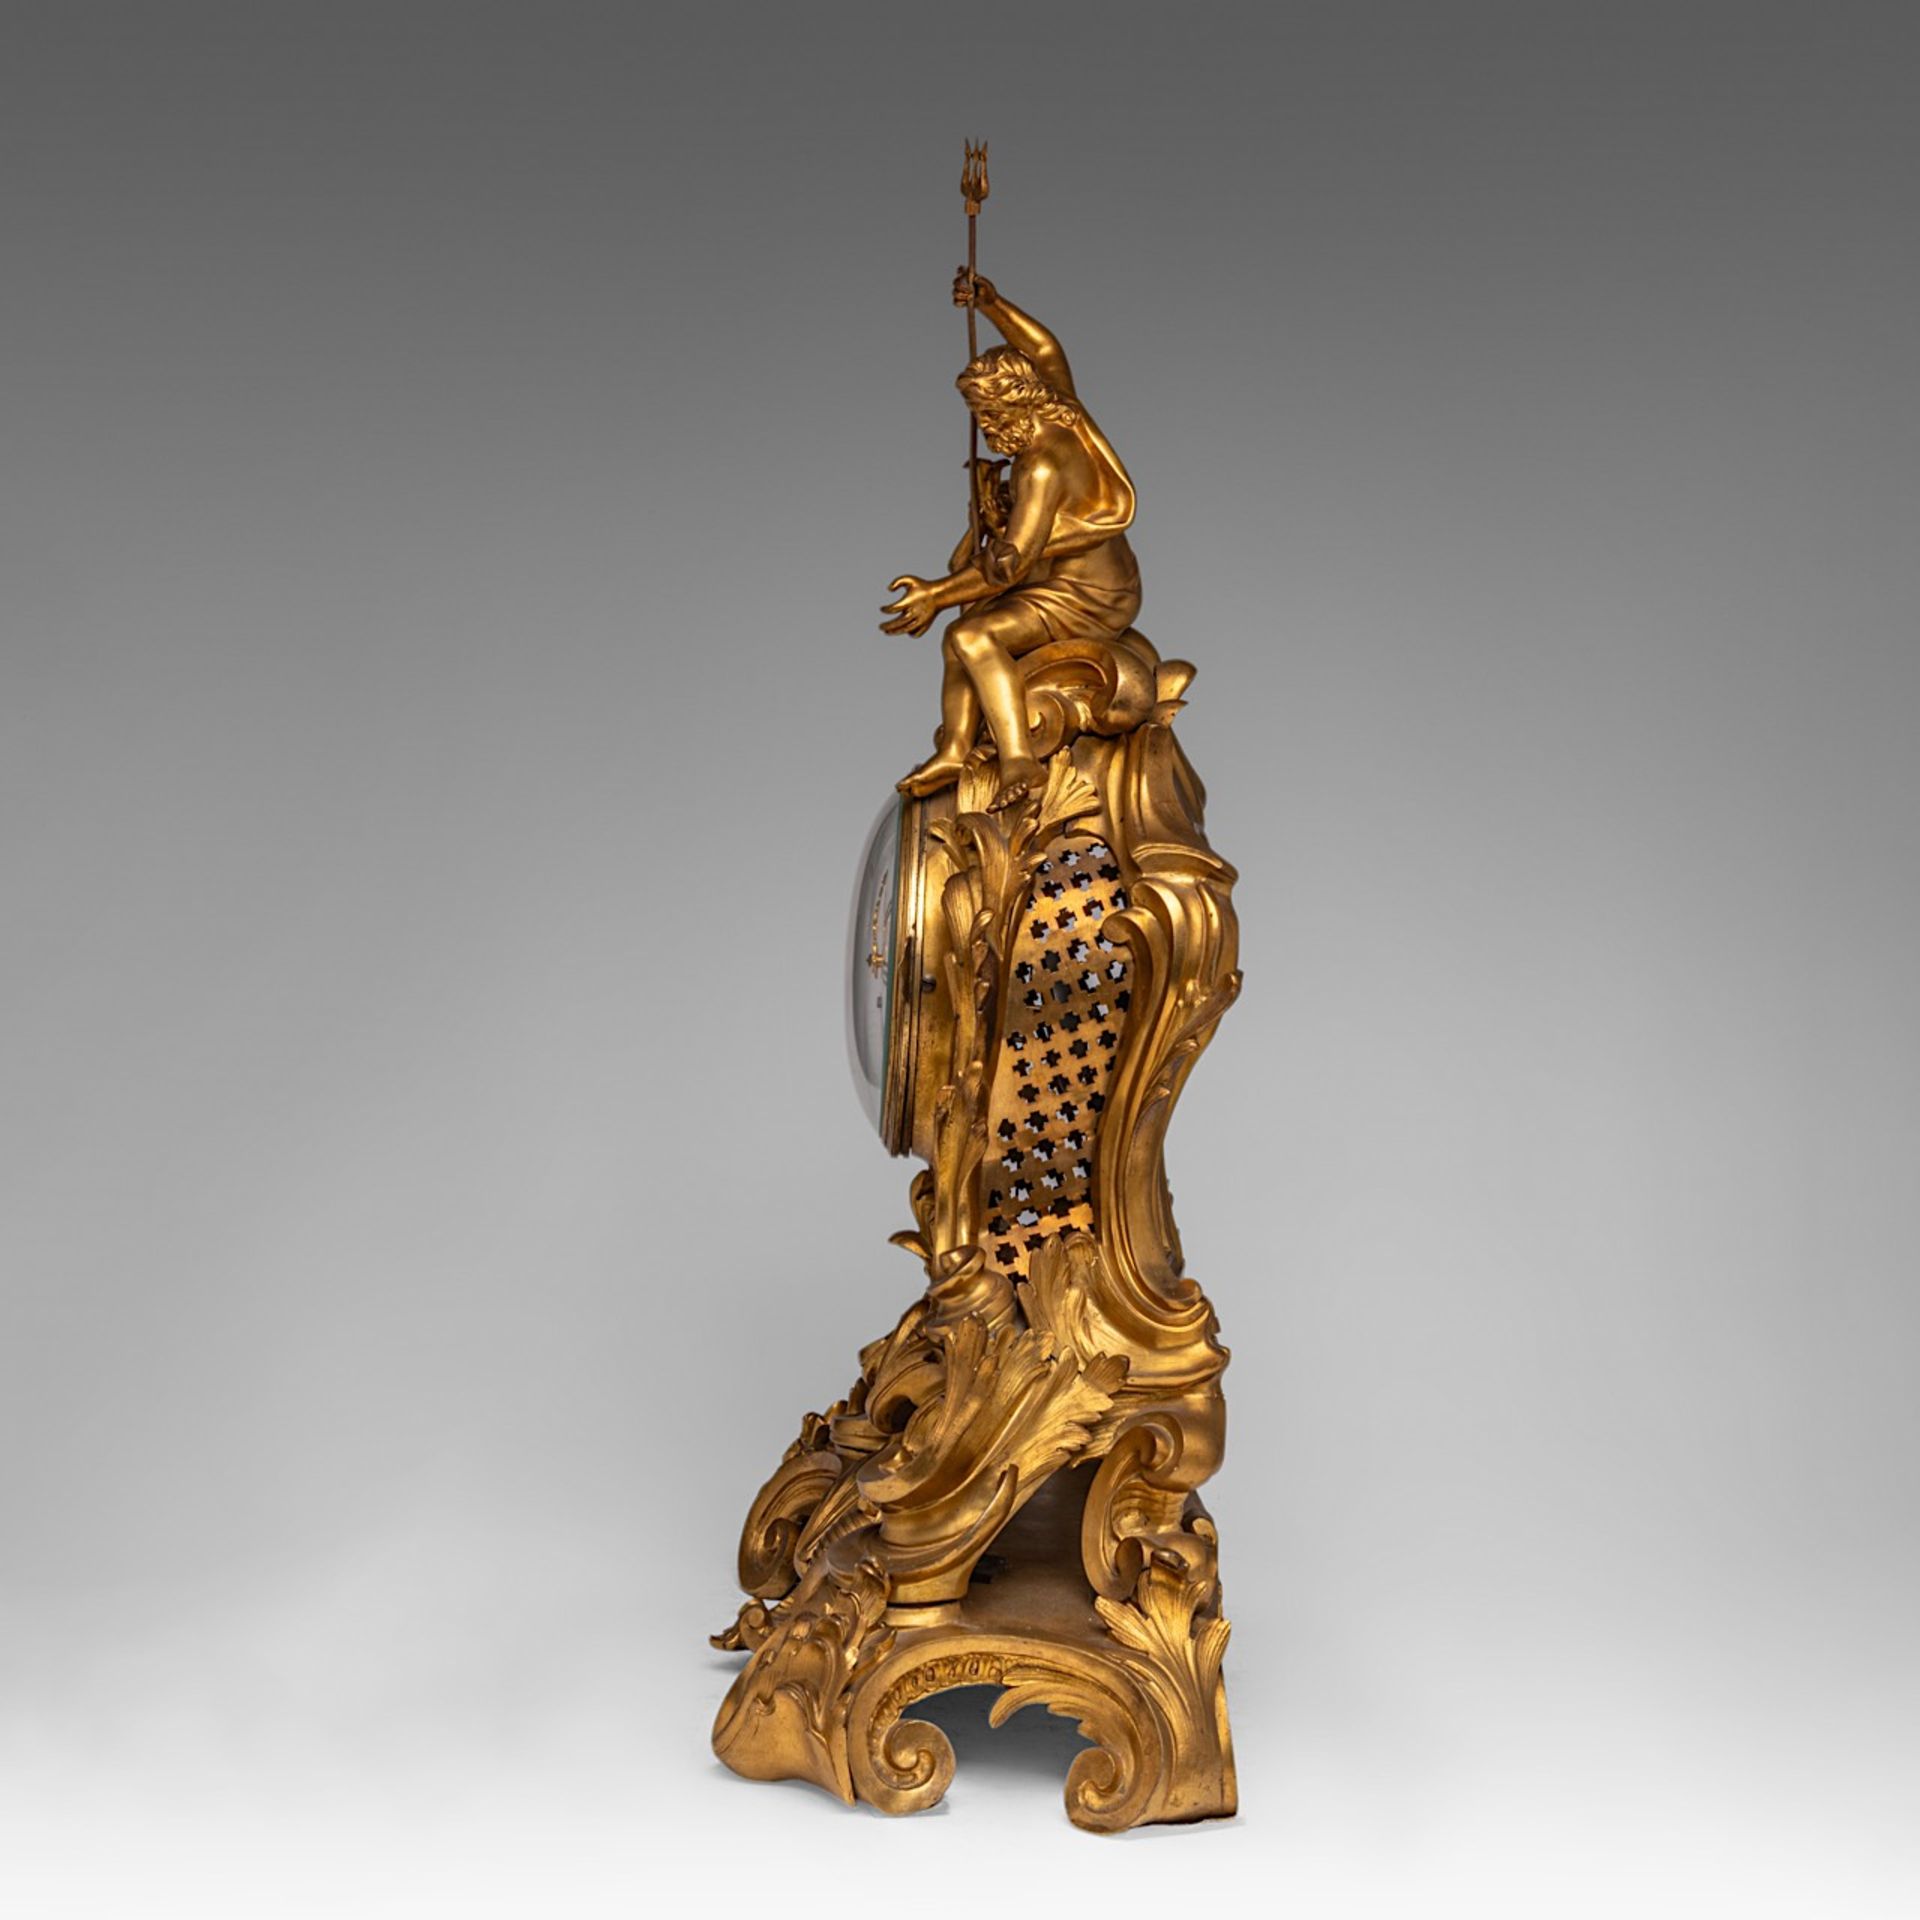 A Rococo Revival gilt bronze mantle clock, decorated with Neptune, Ferdinand Berthoud, H 71 cm - Image 5 of 9